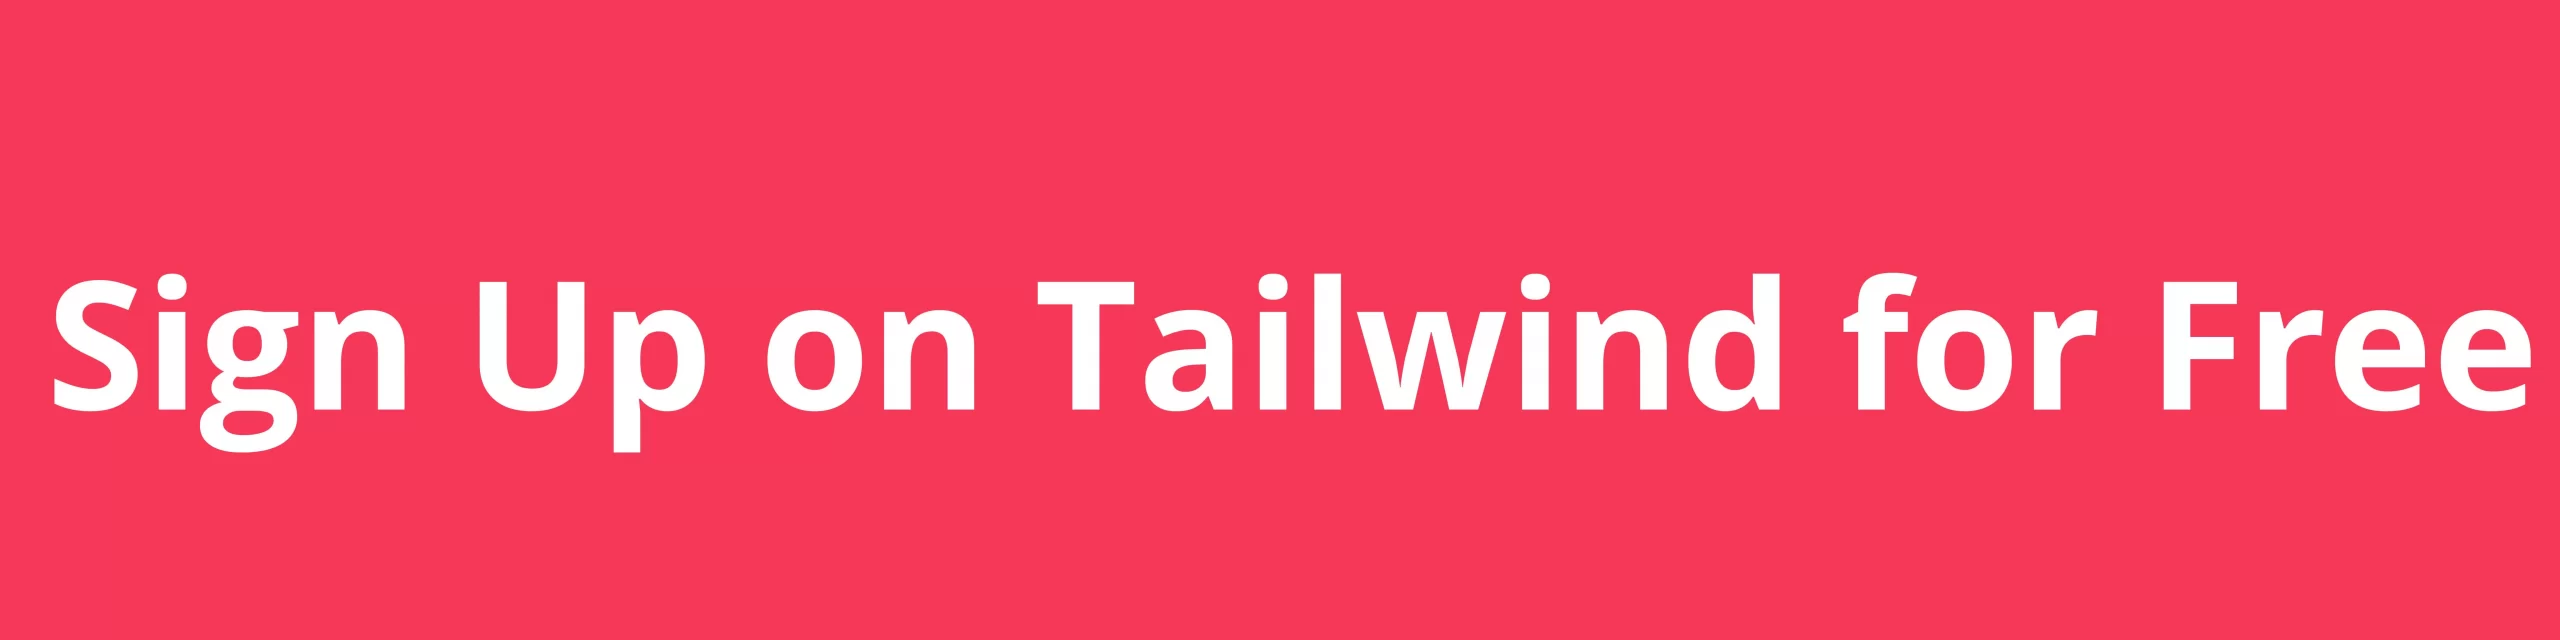 Sign Up on Tailwind for Free